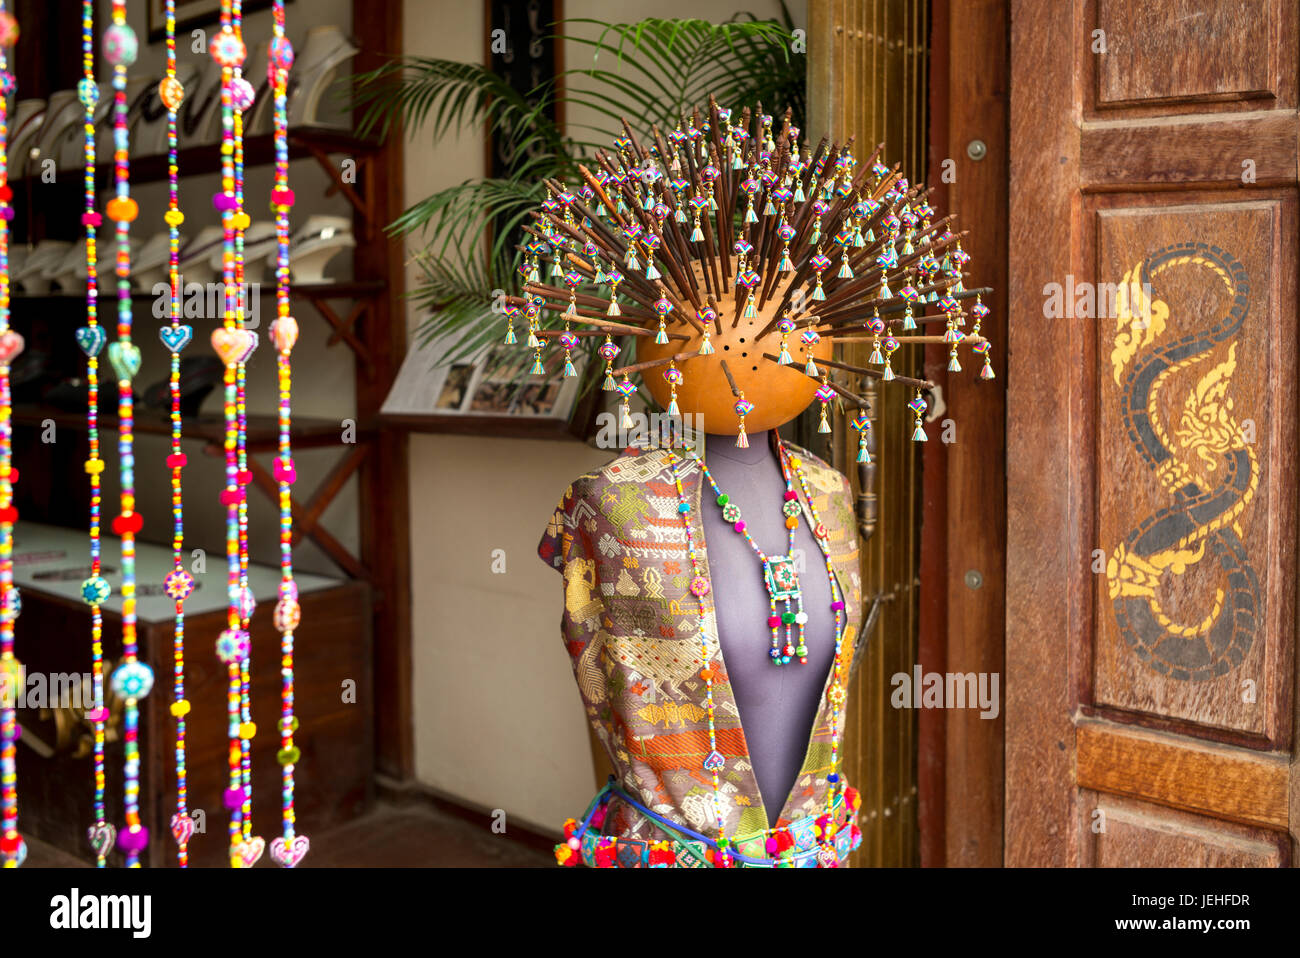 A mannequin wearing traditional Asian clothing, beaded jewelry and numerous sticks with beads sticking out from the head on display Stock Photo